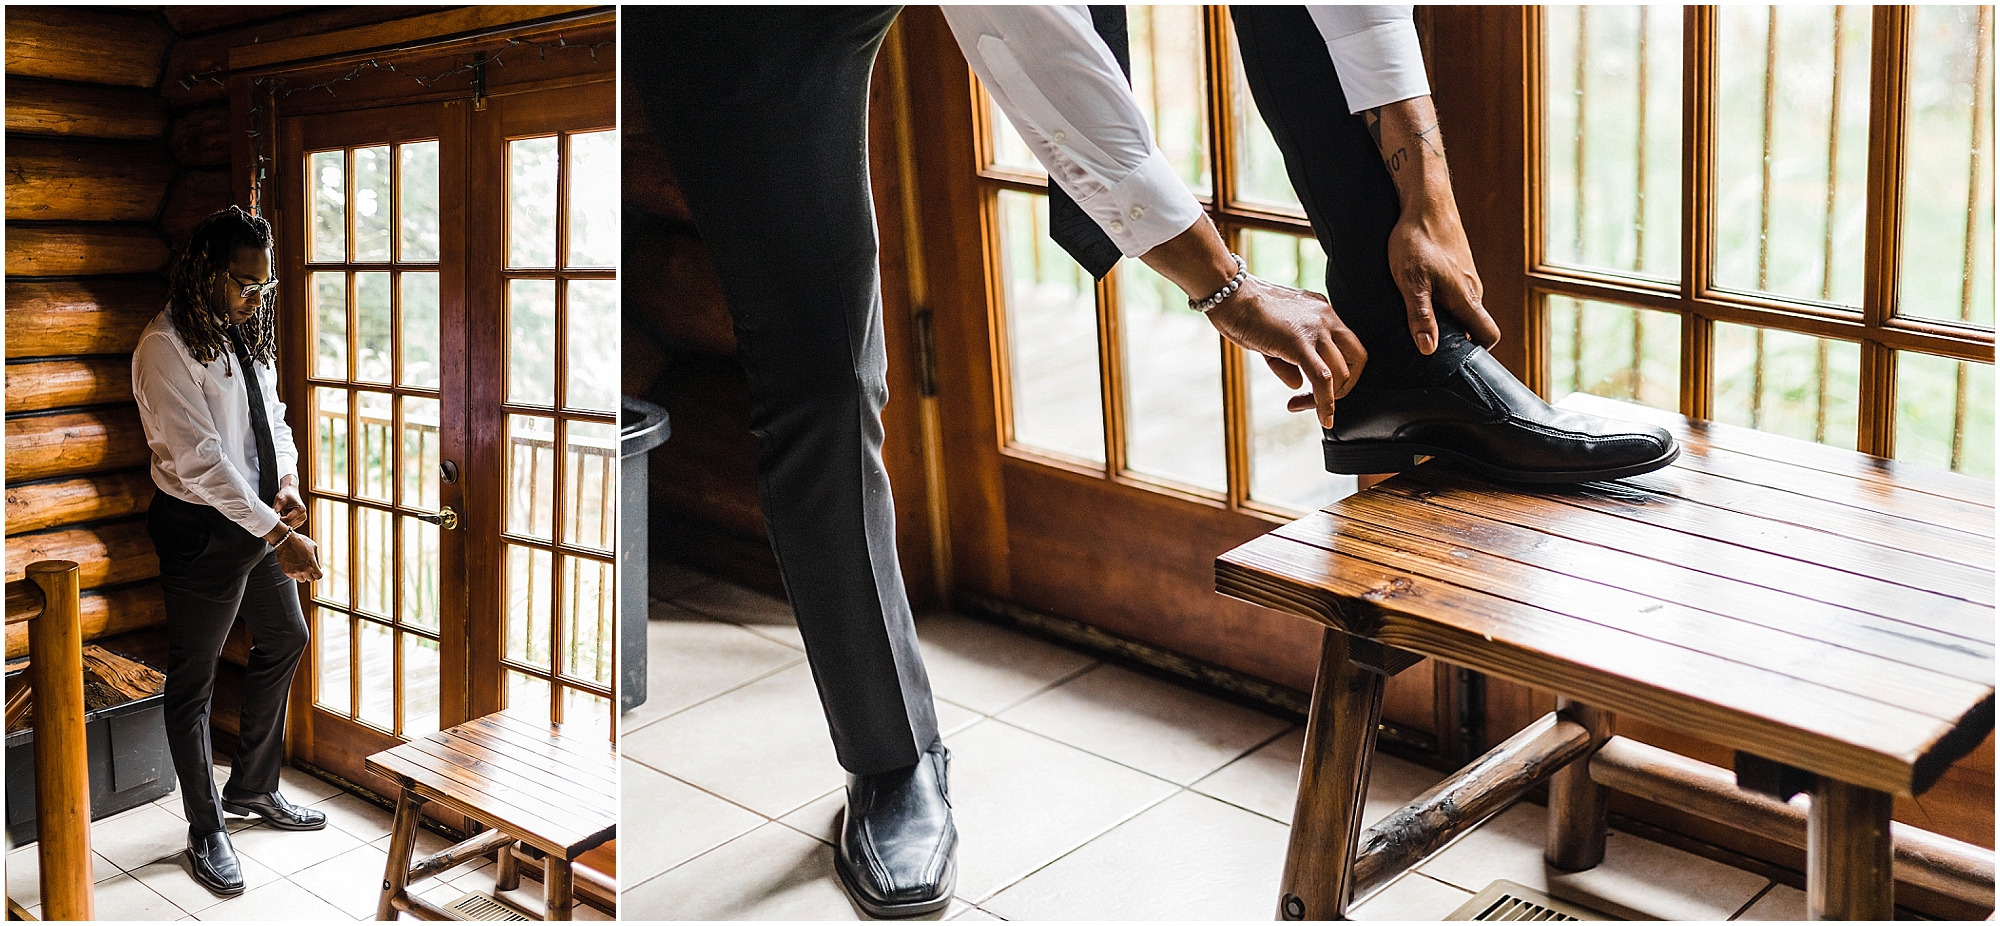 A BIPOC groom puts on his shoes and buttons the sleeves of his white dress shirt in the doorway of a rustic cabin in the woods before the first look with his fiancé on the afternoon of his Oregon Coast elopement. | Erica Swantek Photography 